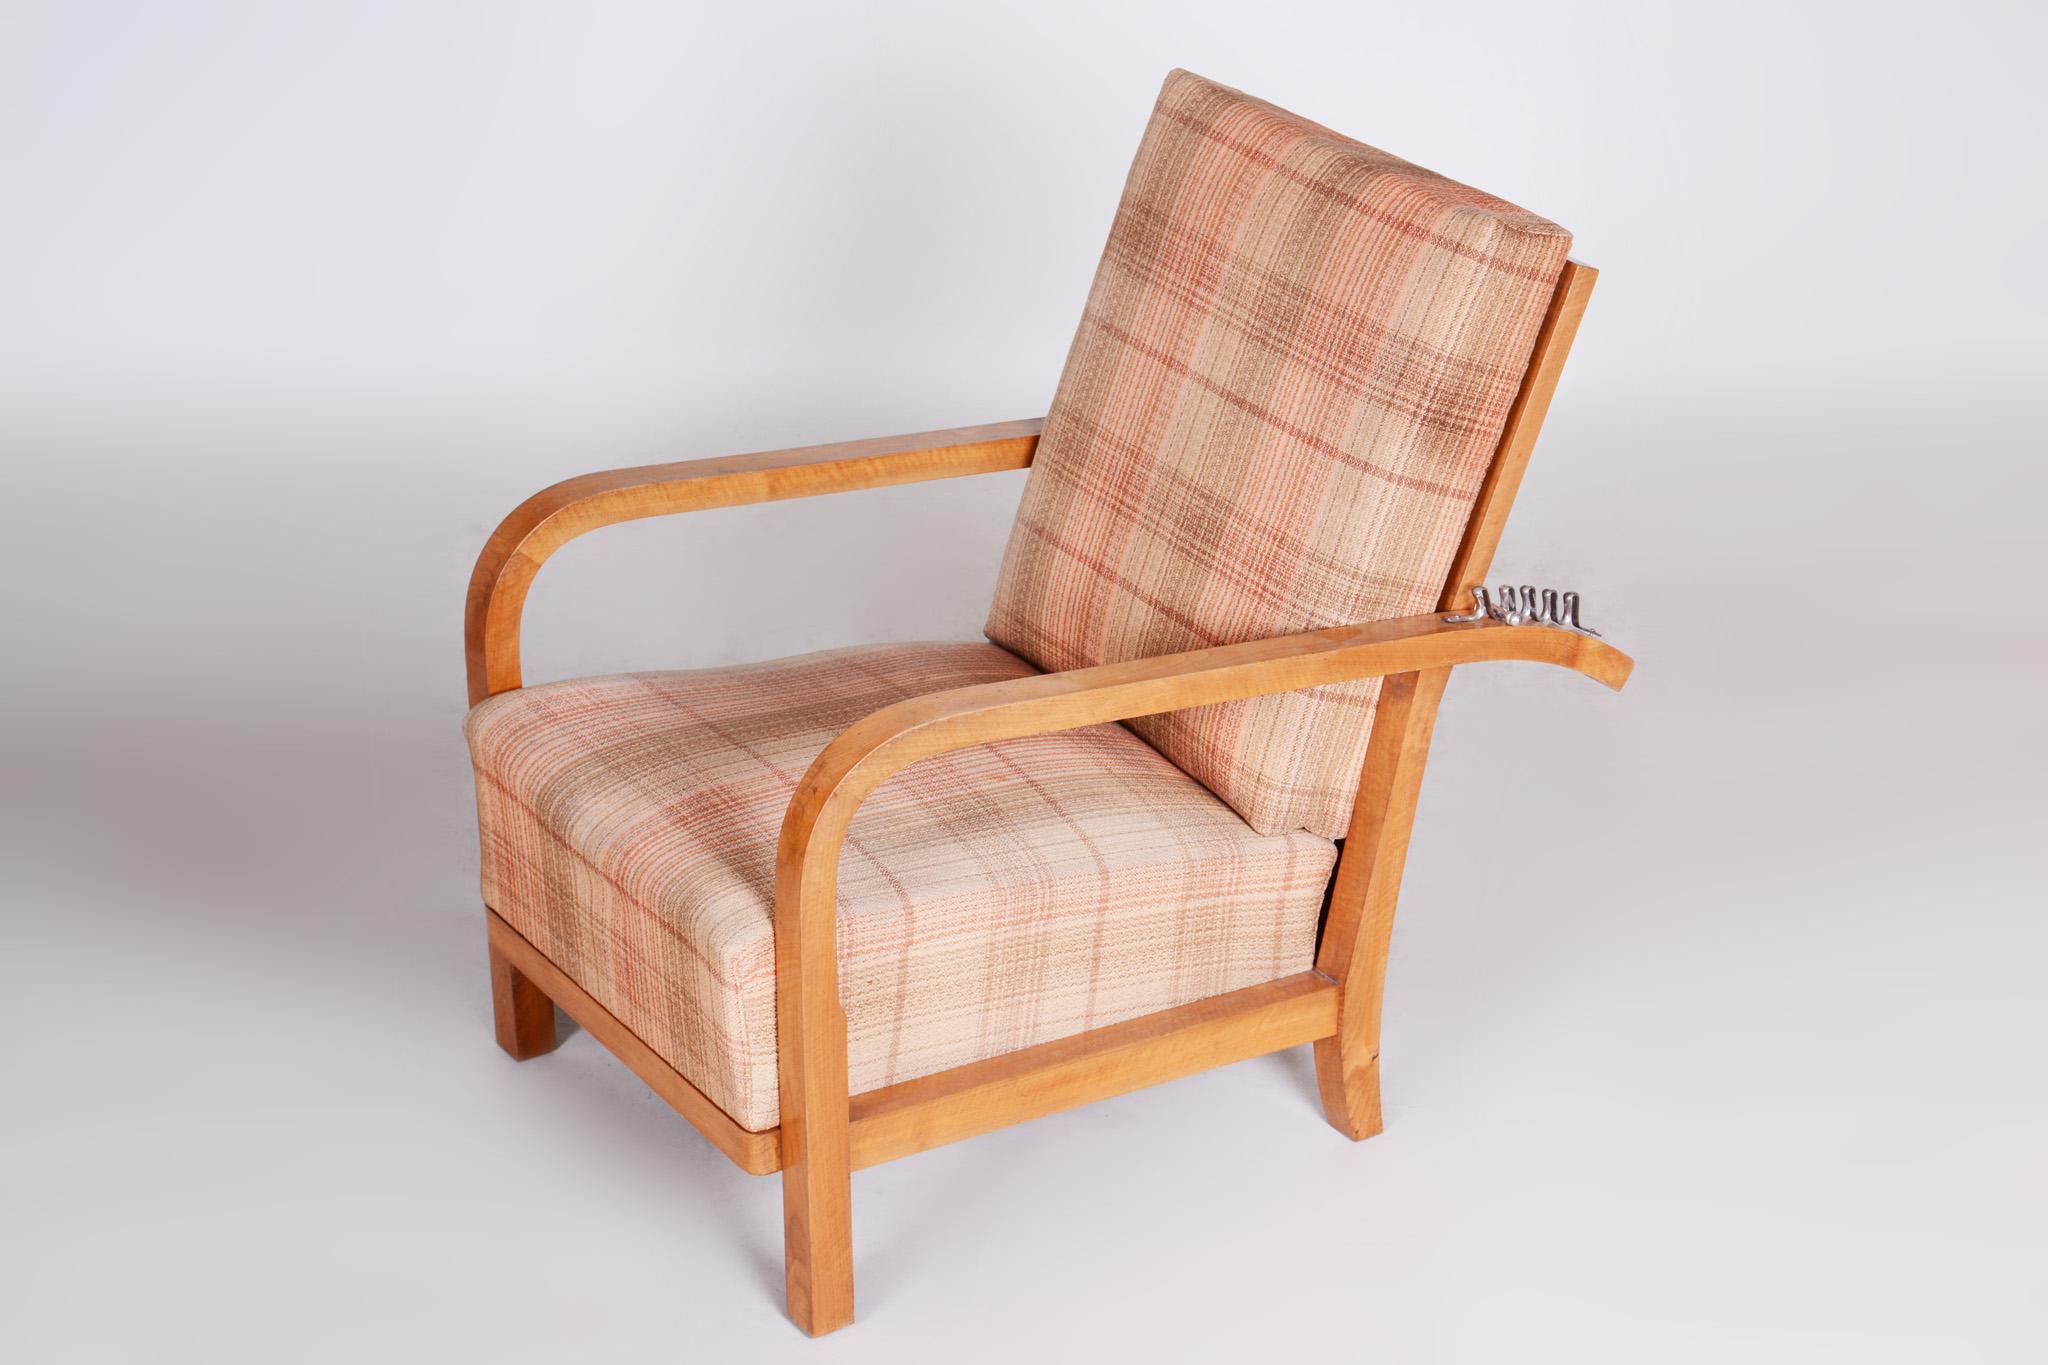 Brown pattern Original Walnut Art Deco Positioning Chair 1930s, Czhechia In Good Condition For Sale In Horomerice, CZ